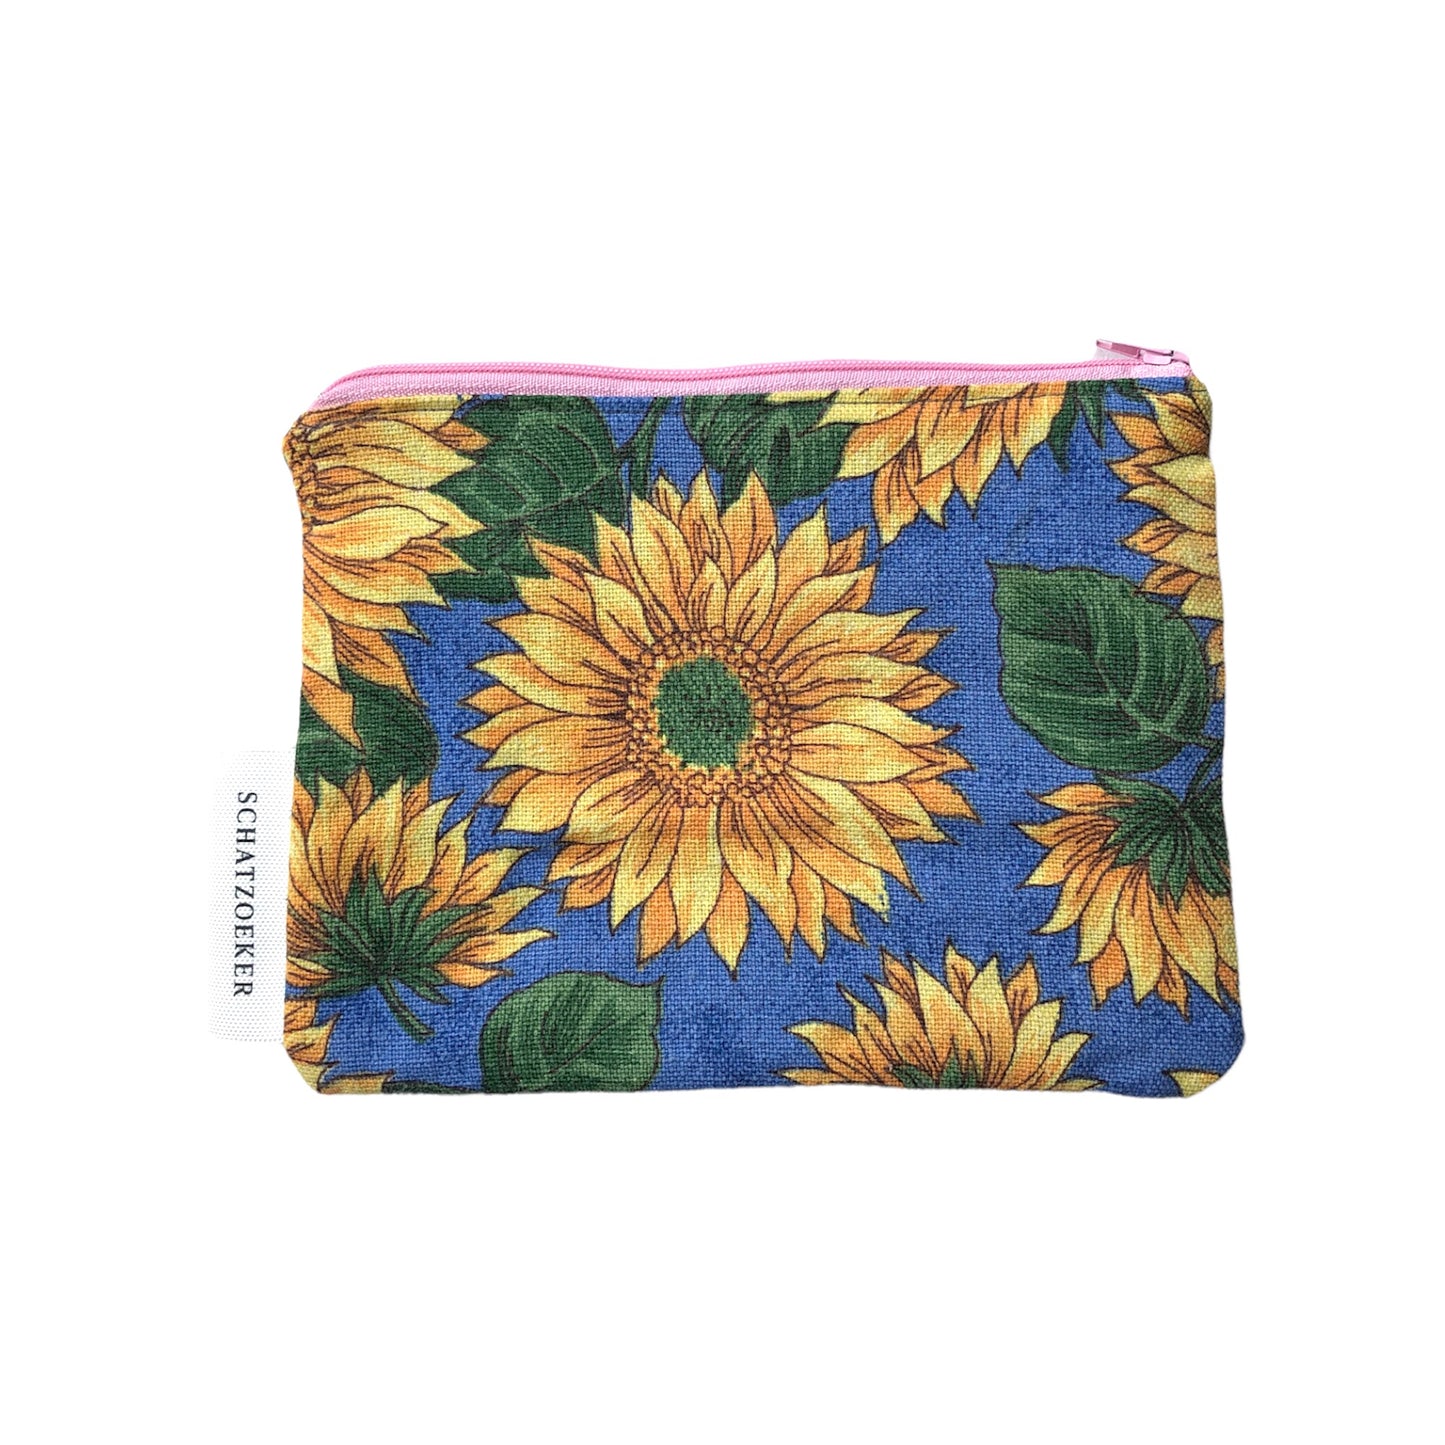 Wallet sunflowers - pink